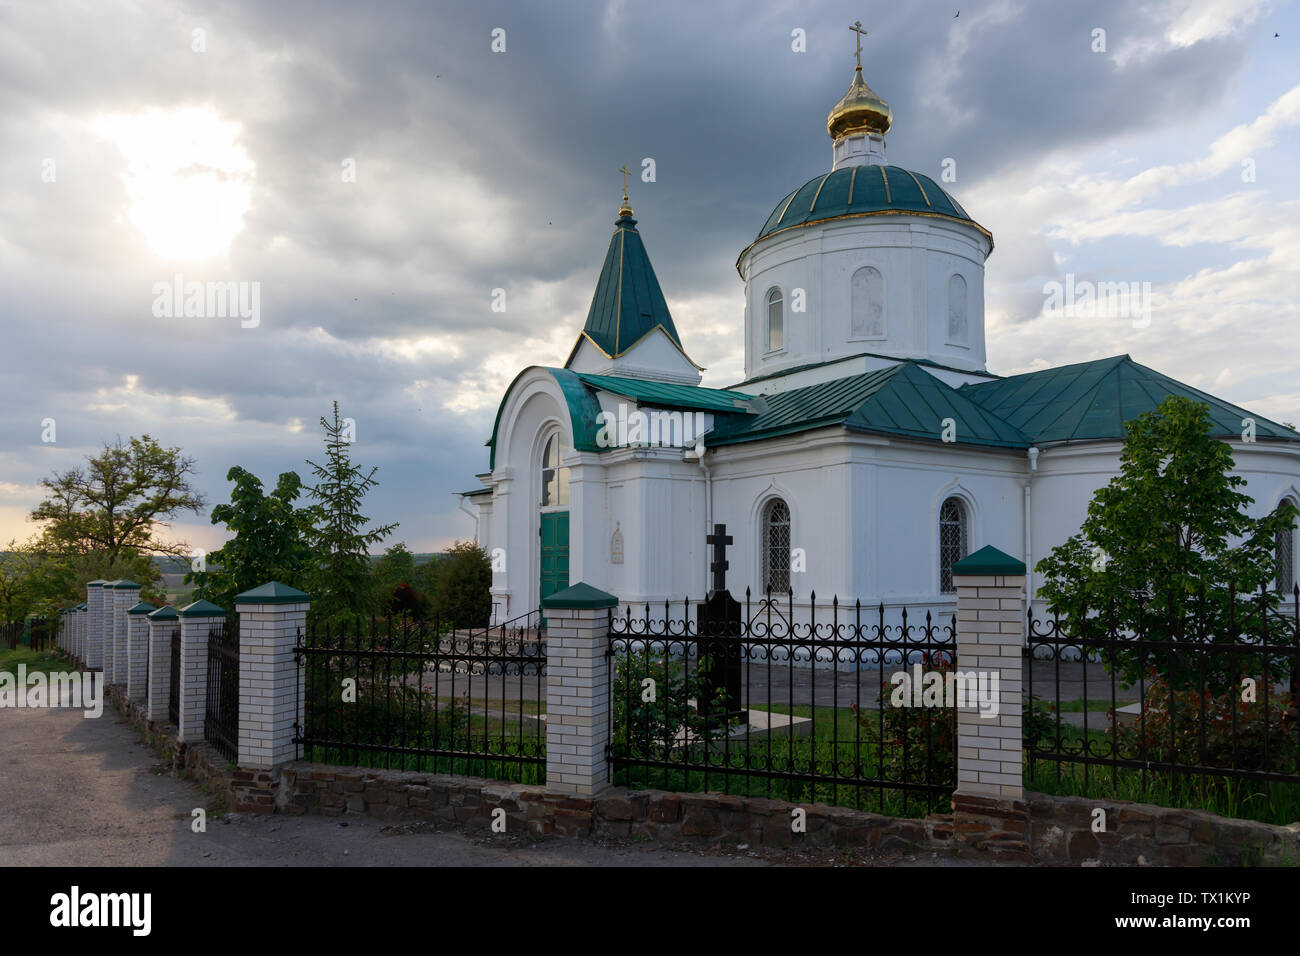 NIKOLAEVKA VILIAGE, ROSTOV REGION, RUSSIA, MAY 12, 2019: The Nikolsky Temple and beautiful clouds in sunny weather Stock Photo